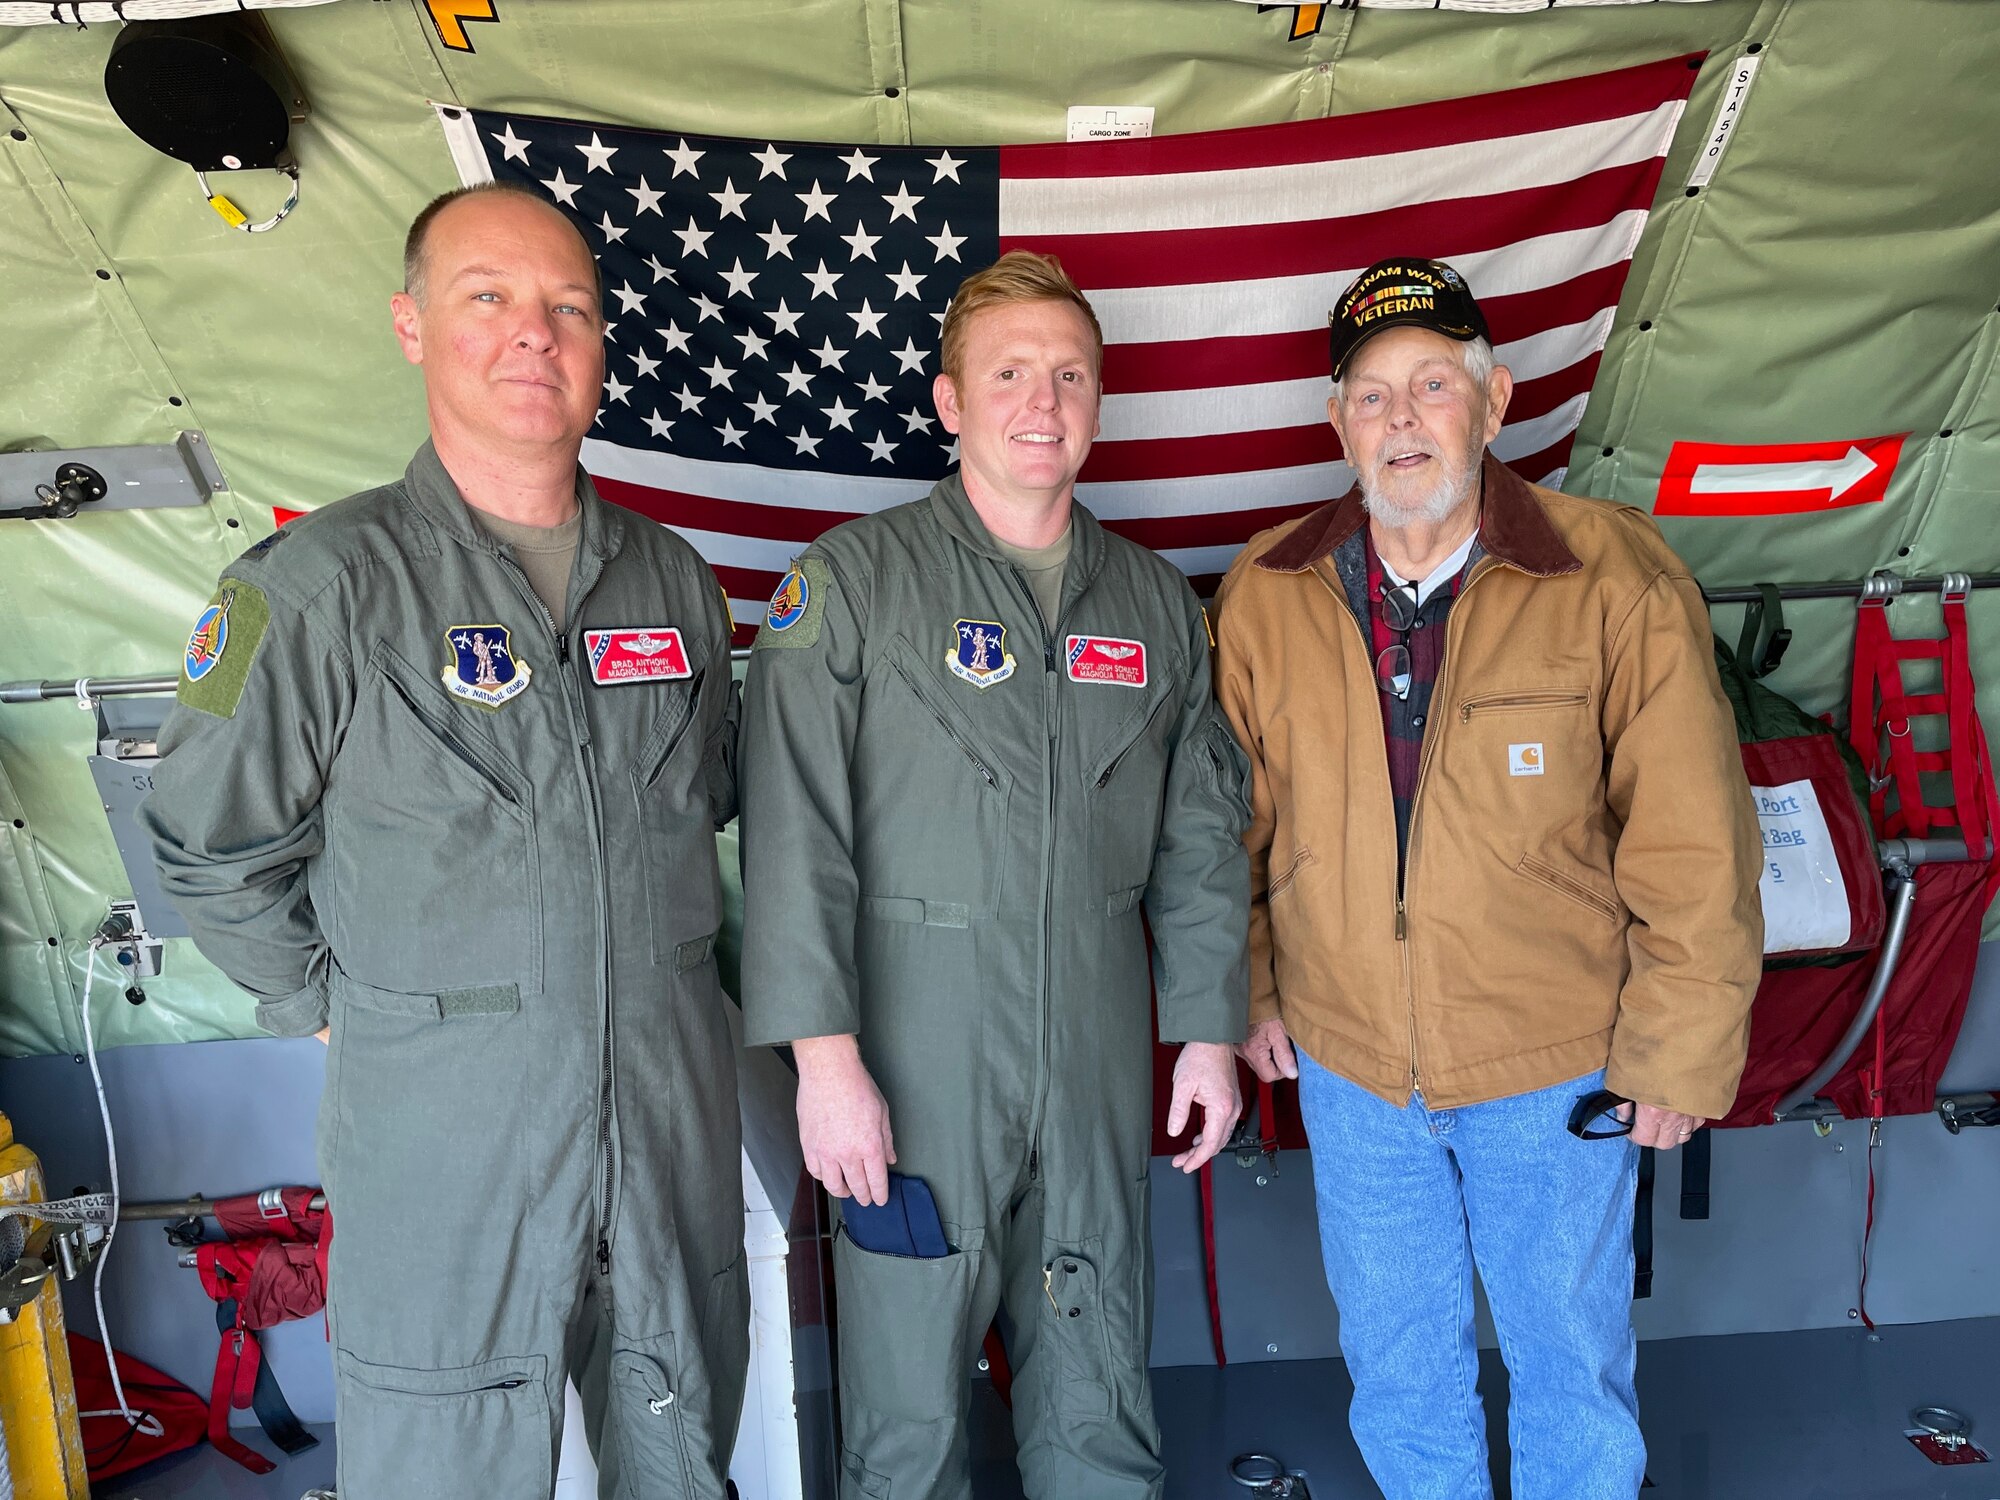 U.S. Air Force Lt. Col. Brad Anthony, a KC-135R pilot, and Tech. Sgt. Joshua Schultz, a boom operator, who are both with the 153rd Air Refueling Squadron, stand with Vietnam veteran James Roberts inside a KC-135R Stratotanker aircraft, Nov. 6, 2021, at Key Field Air National Guard Base, Mississippi.